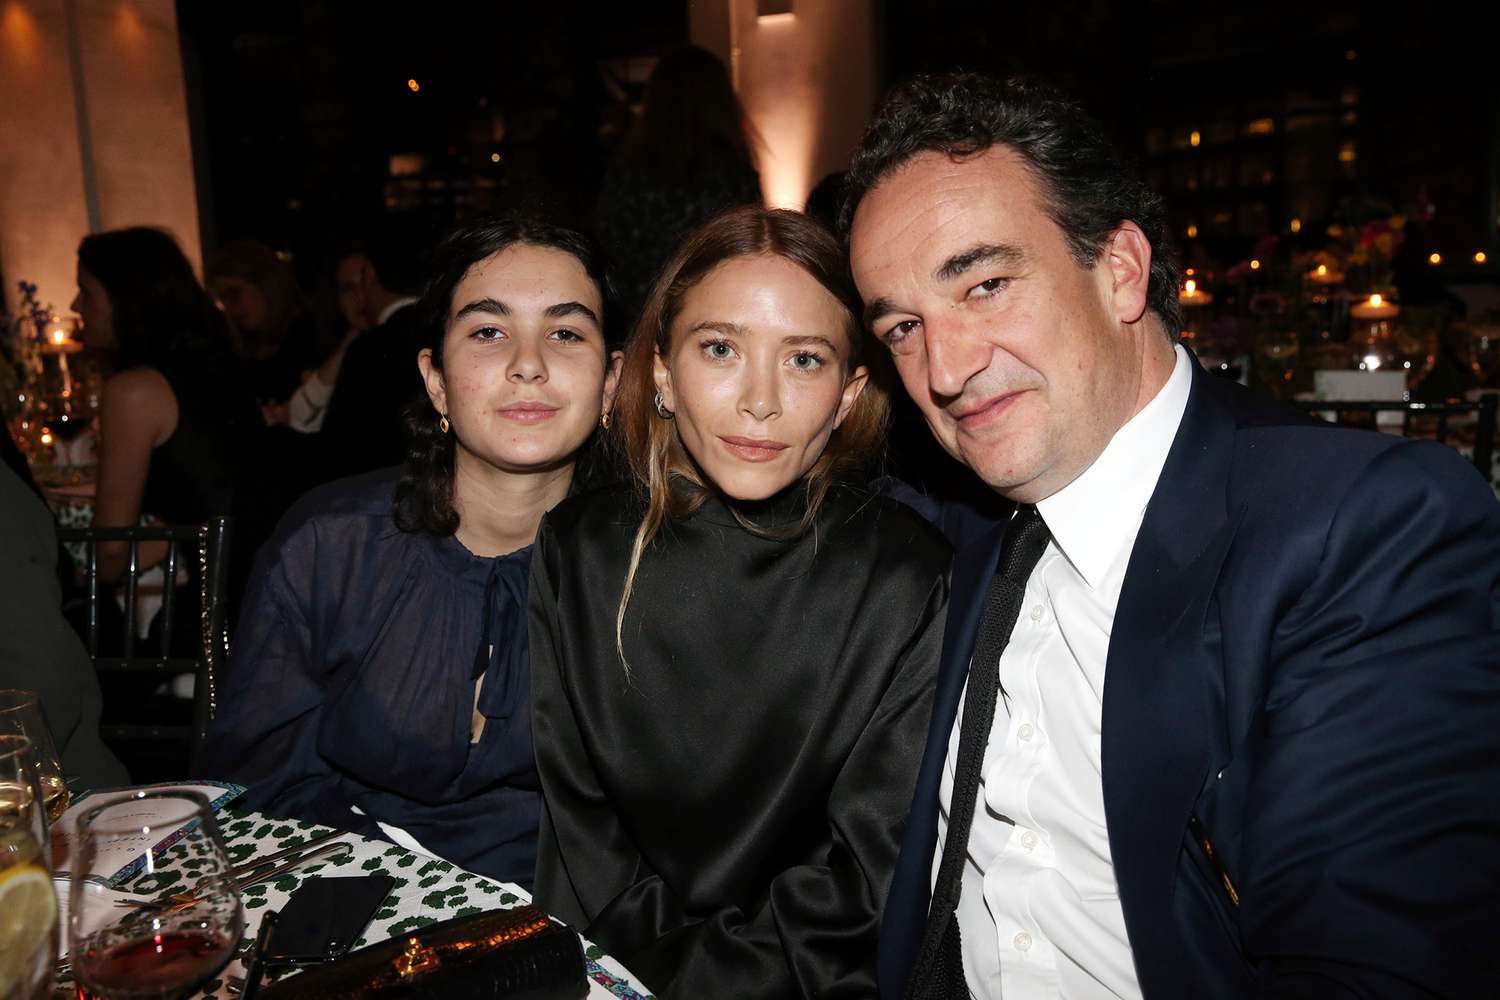 Mary Kate Olsen And Olivier Sarkozy Clashed Over Having Kids Source People Com